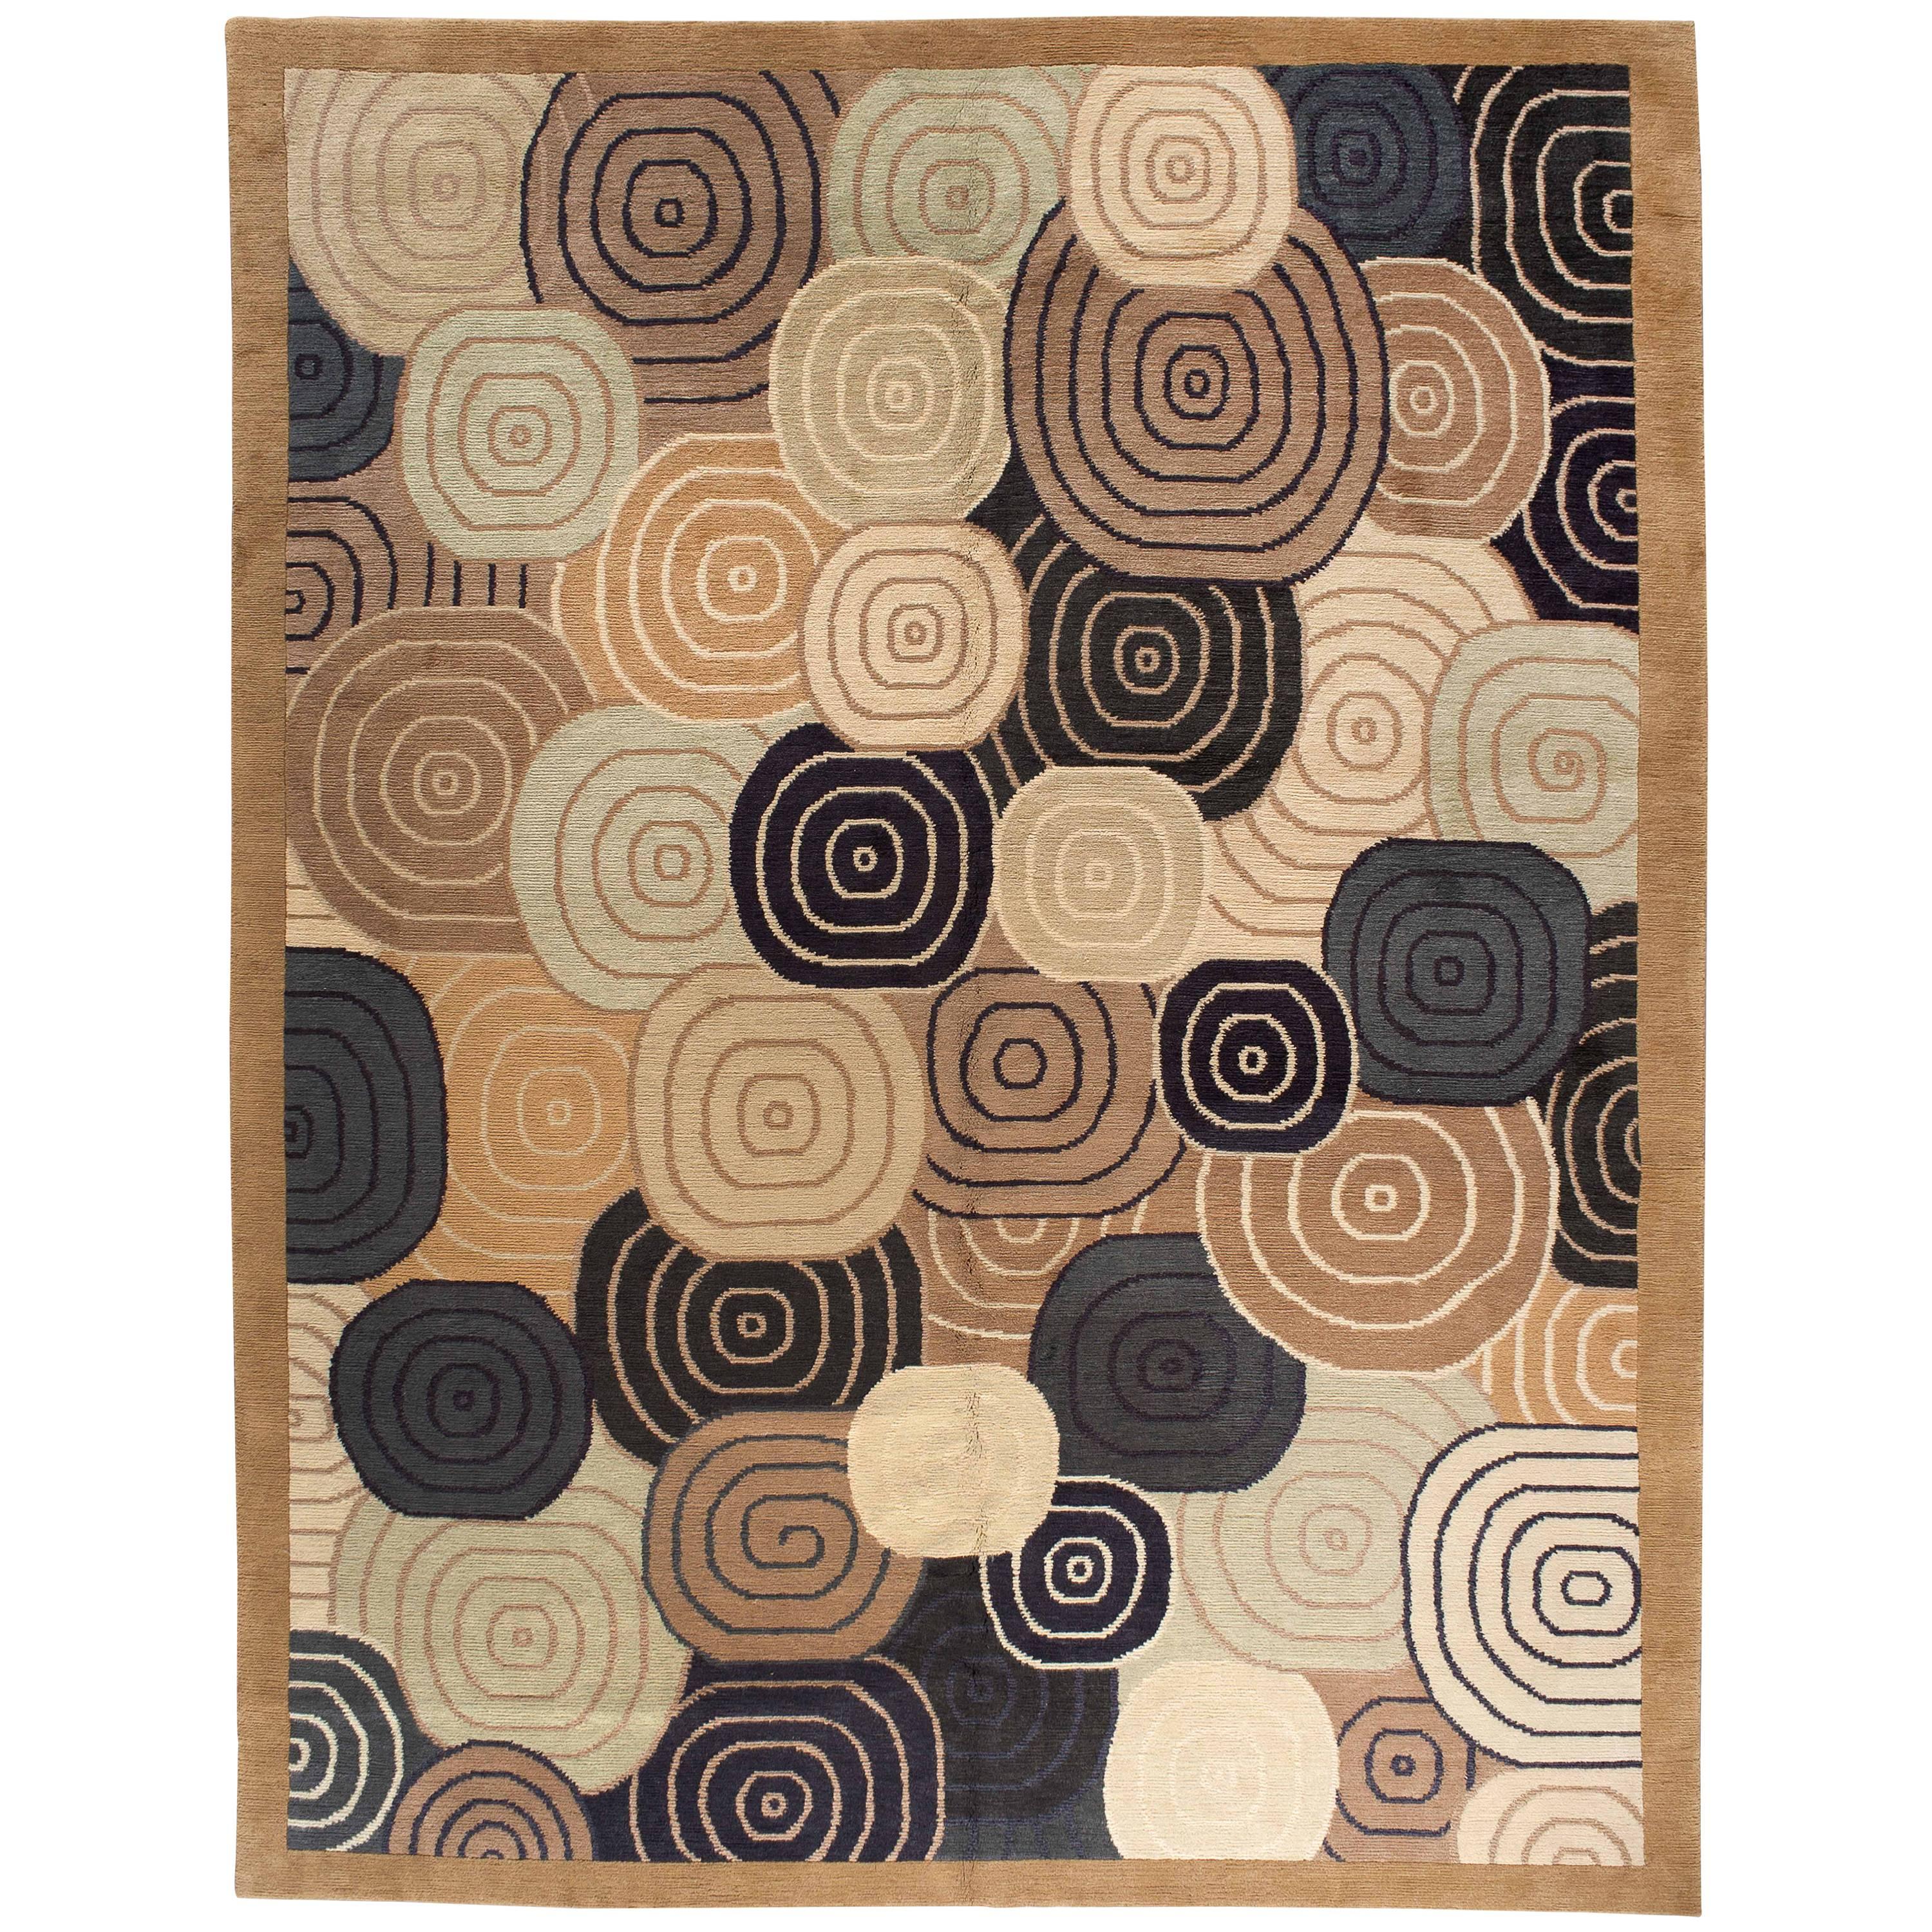 Black and Gold Swirl Design Rug For Sale